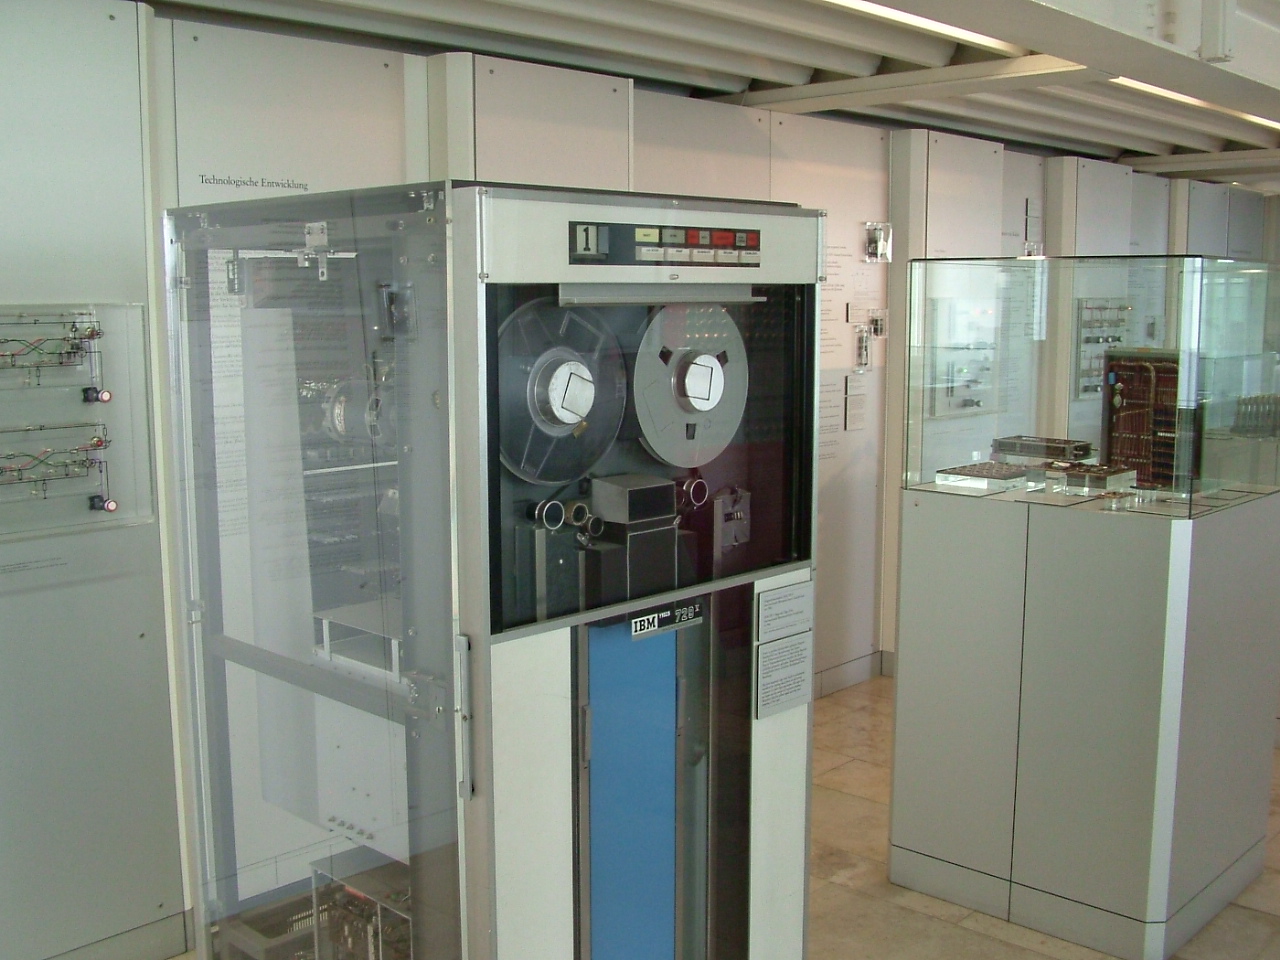 IBM 729V magnetic tape unit at the Deutsches Museum in Munich.